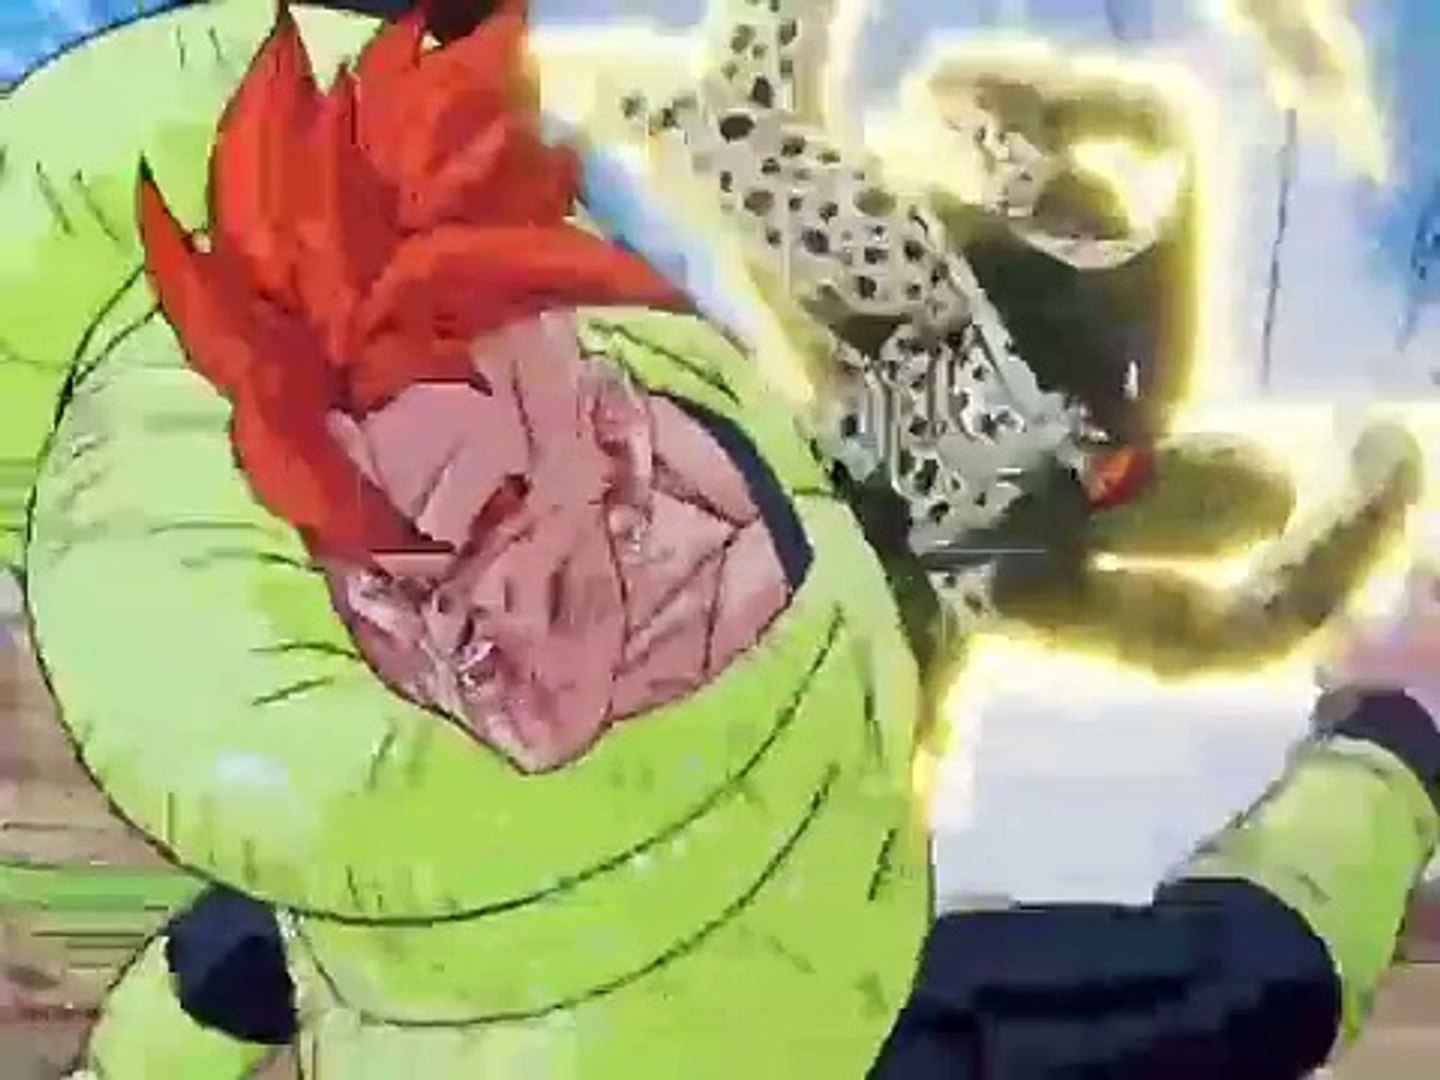 Dragonball Z Kai: Android 16 uses Hells Flash on Cell. - Dailymotion Video